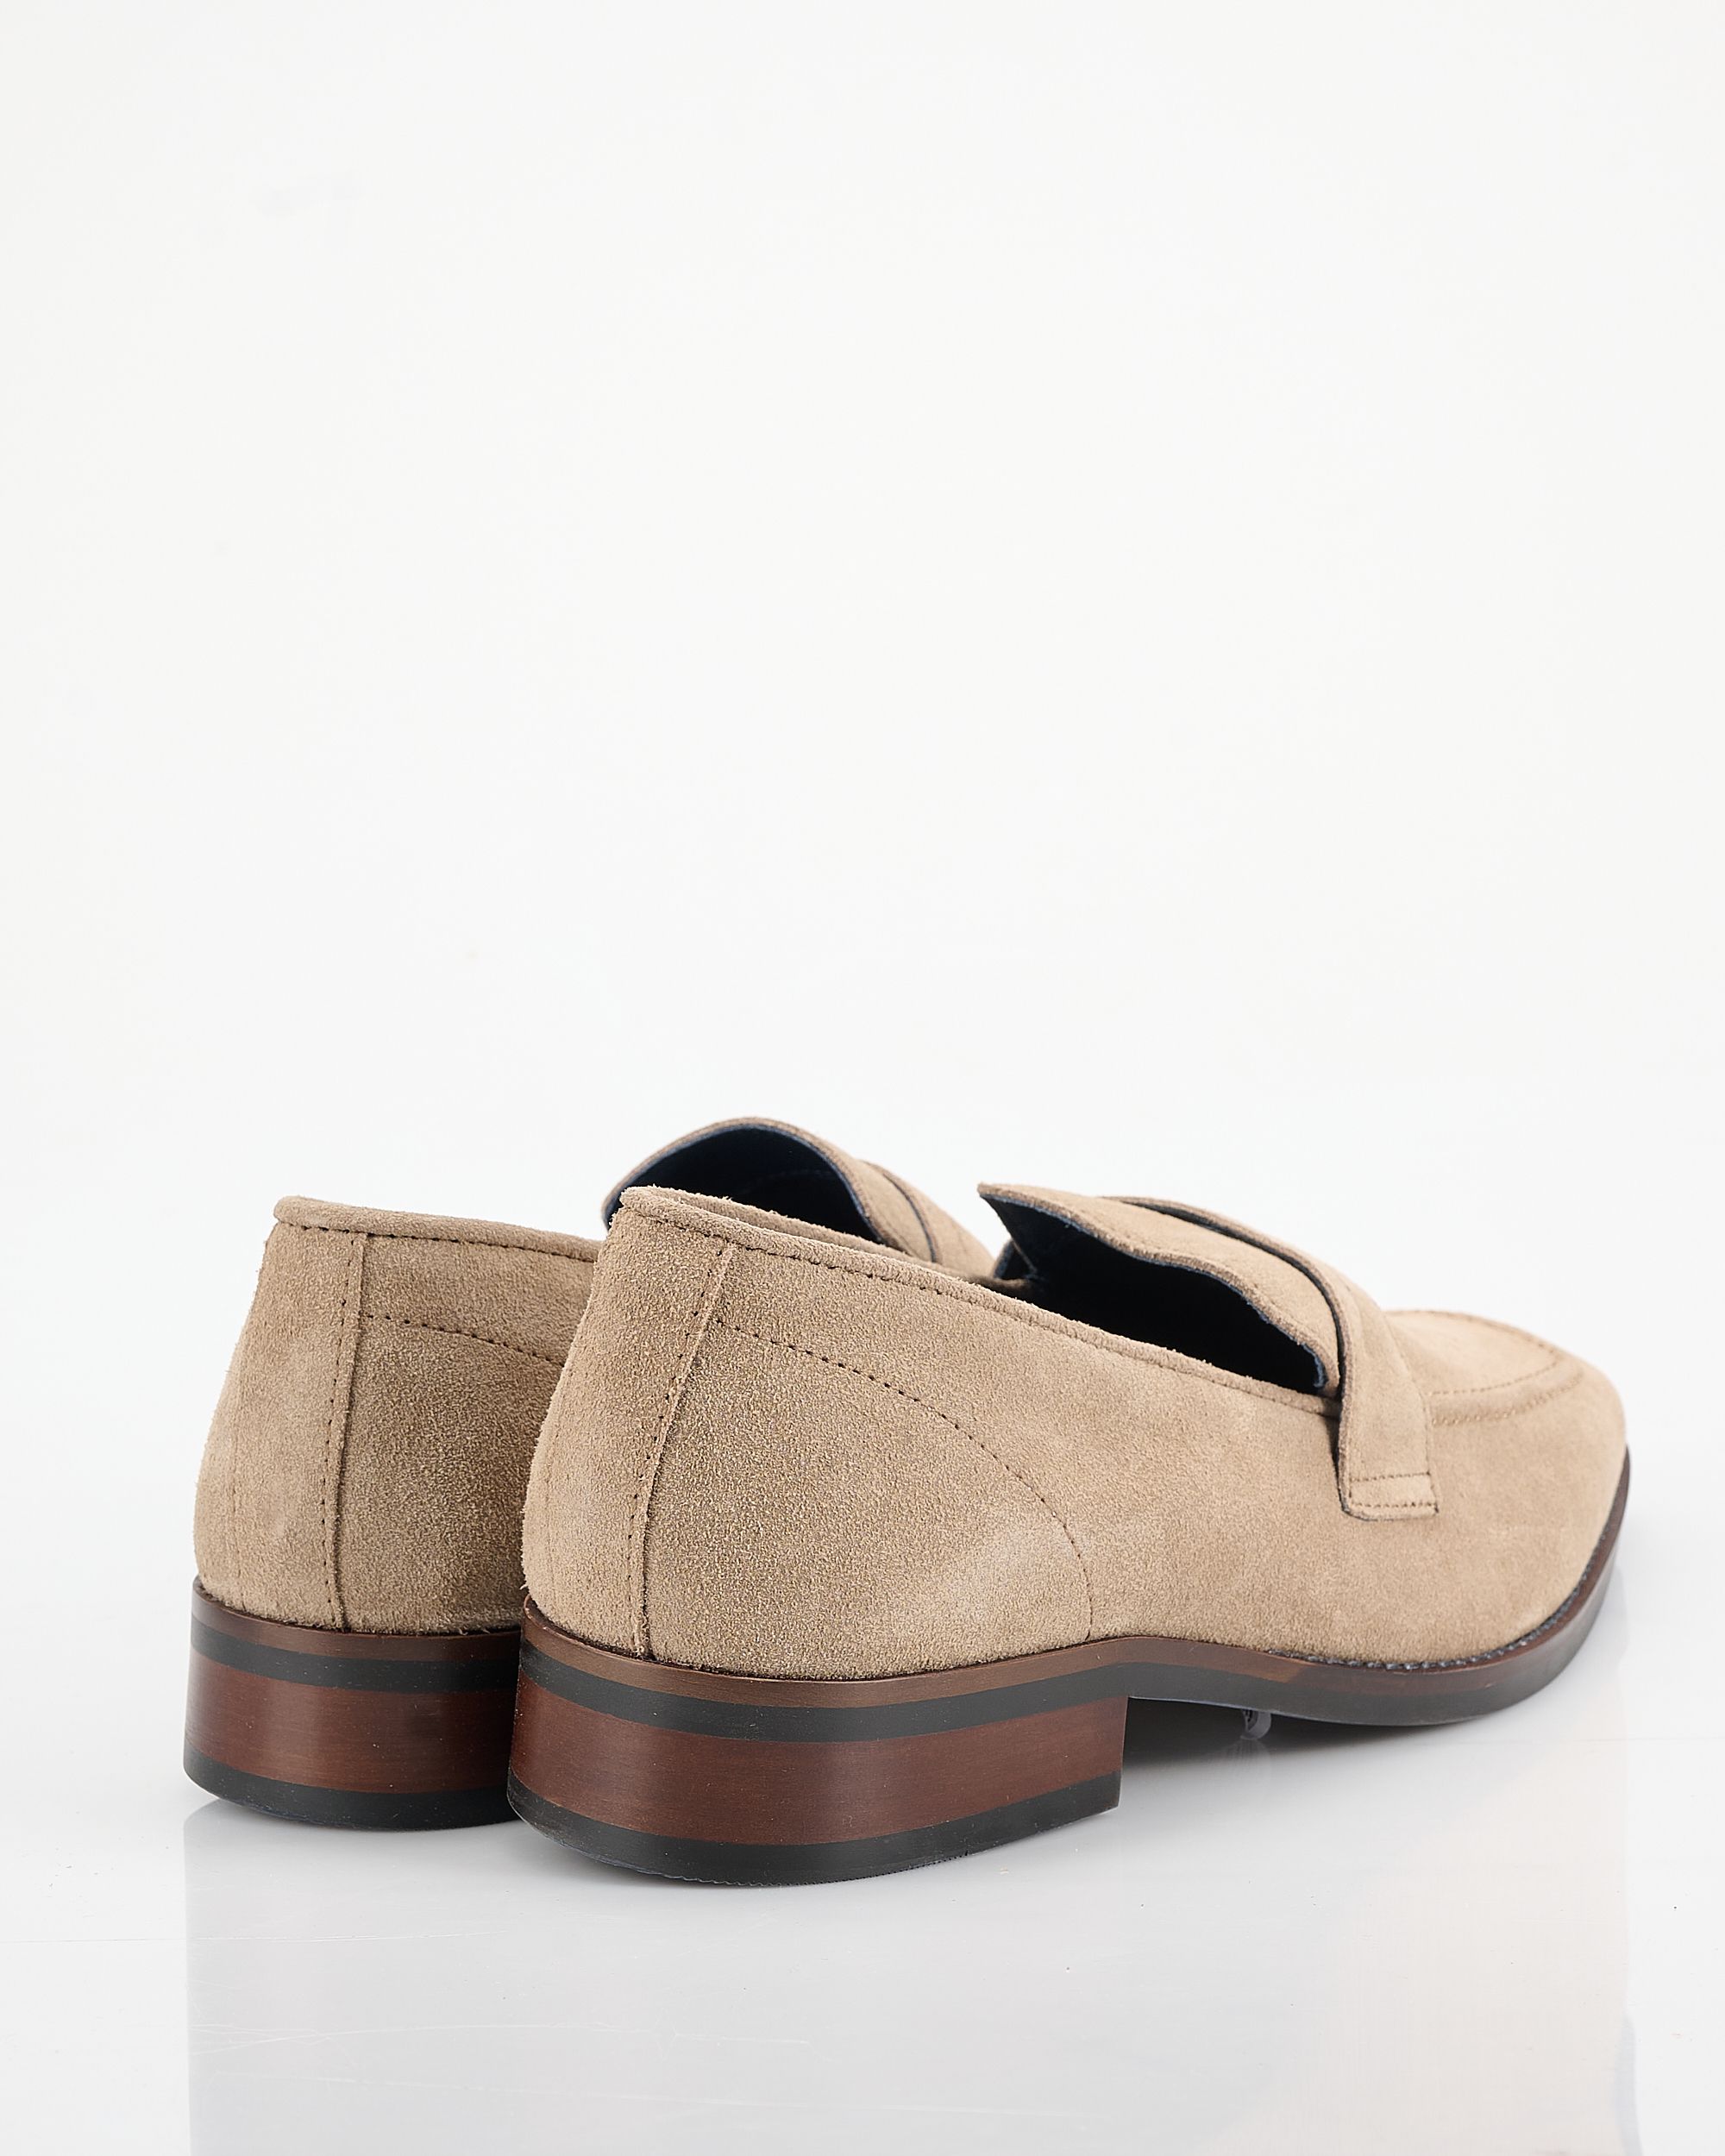 Recall - Loafers Taupe 091870-002-44